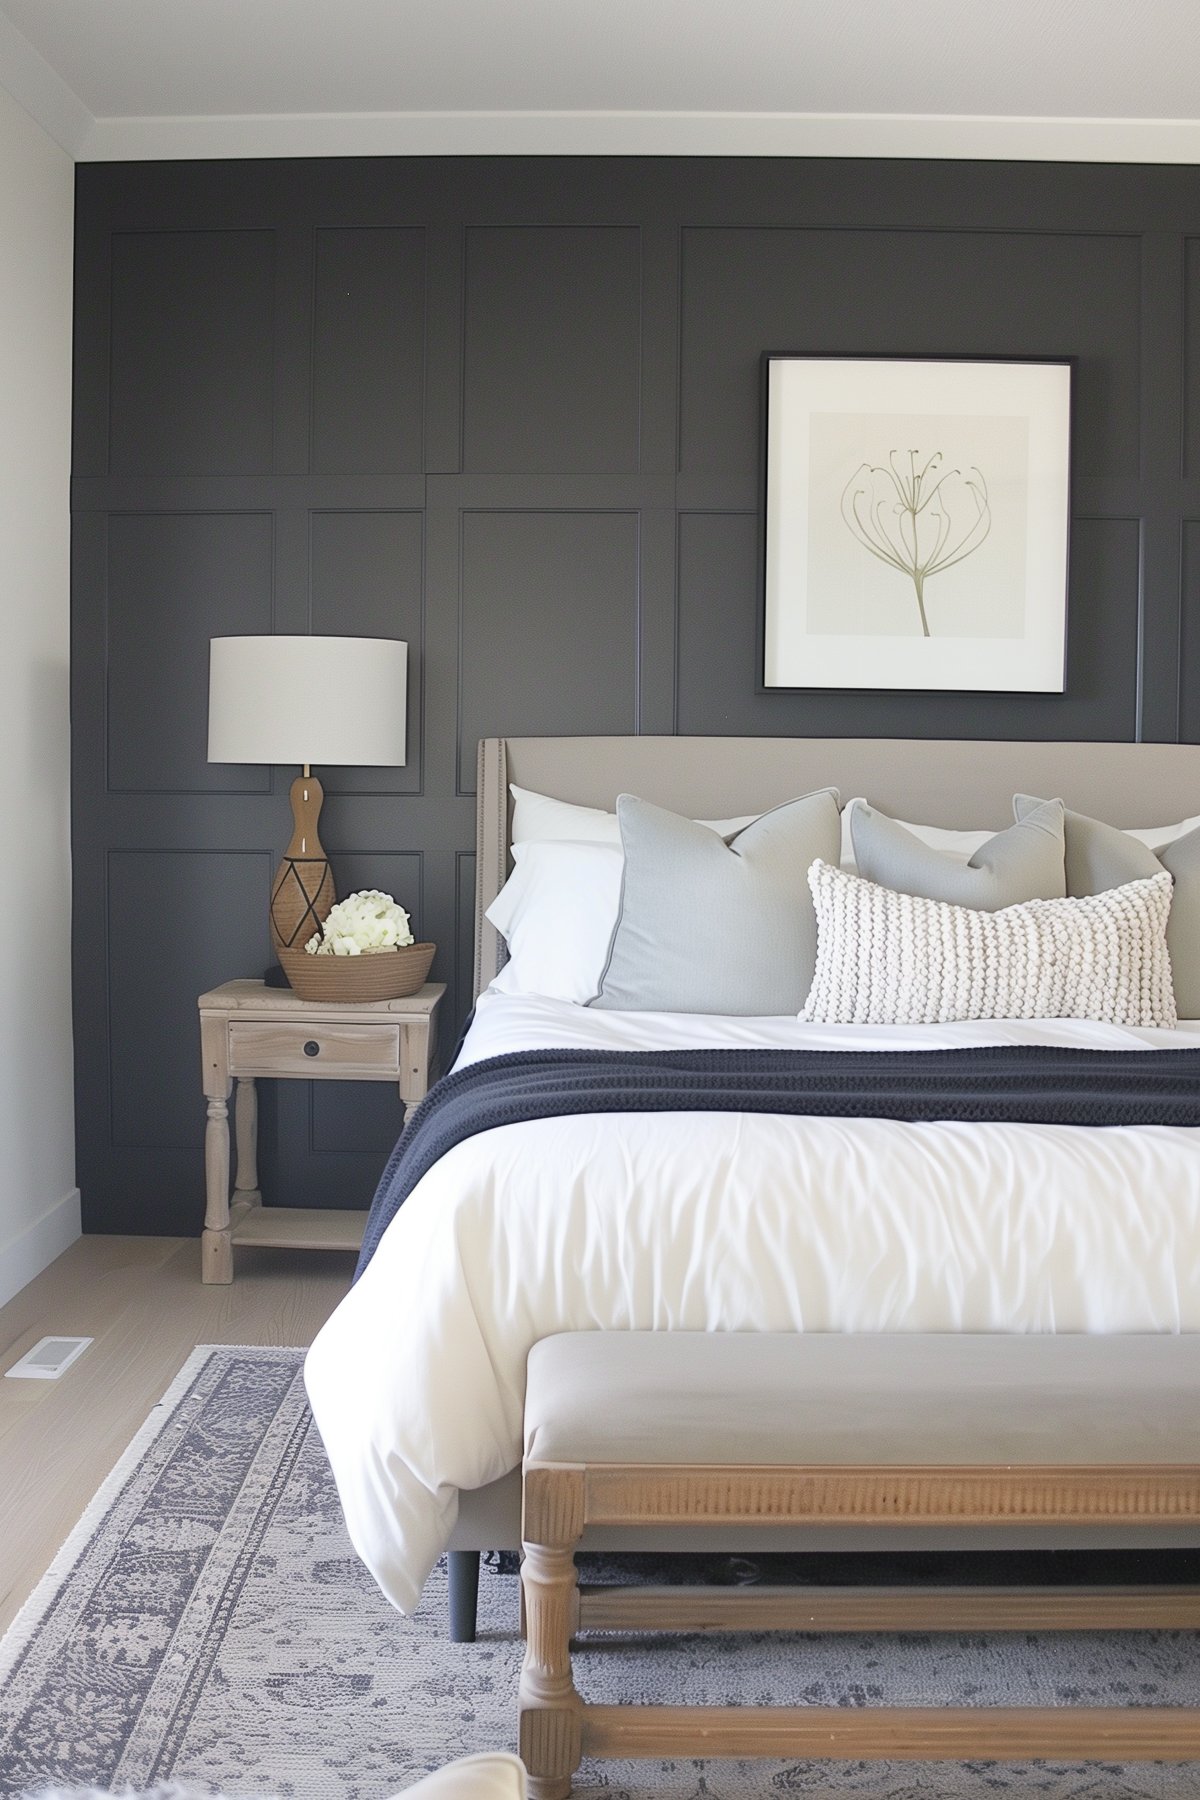 Bm Kendall Charcoal accent wall in a bedroom